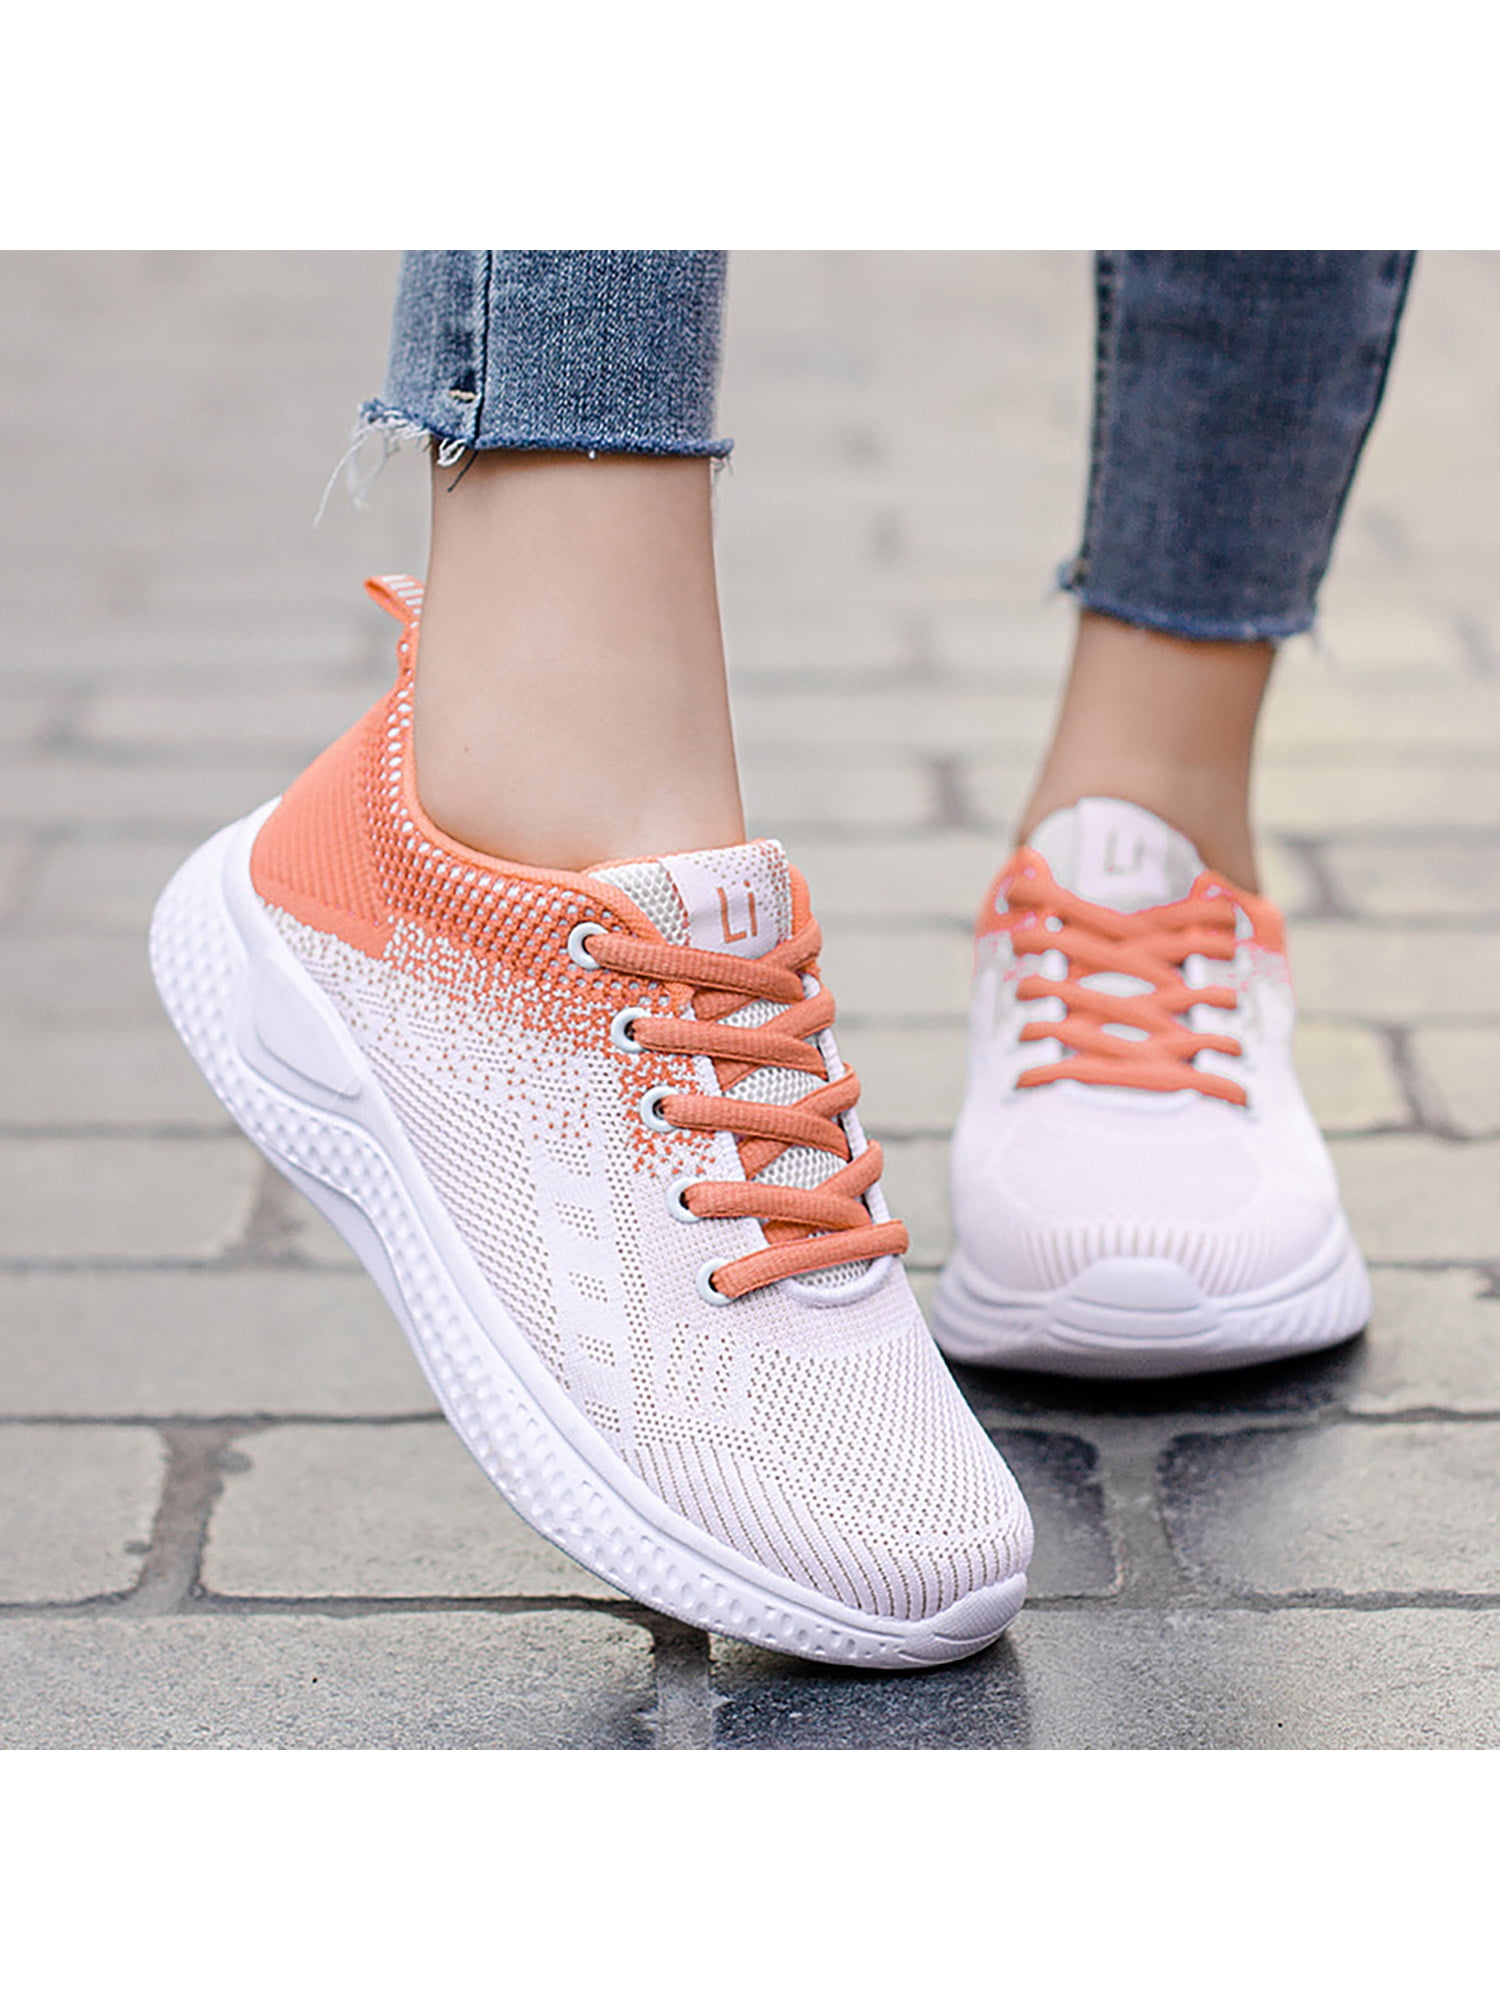 Details about   Women's Tennis Trainers Sports Shoes Athletic Mesh Lace Up Casual Sneakers Gym 